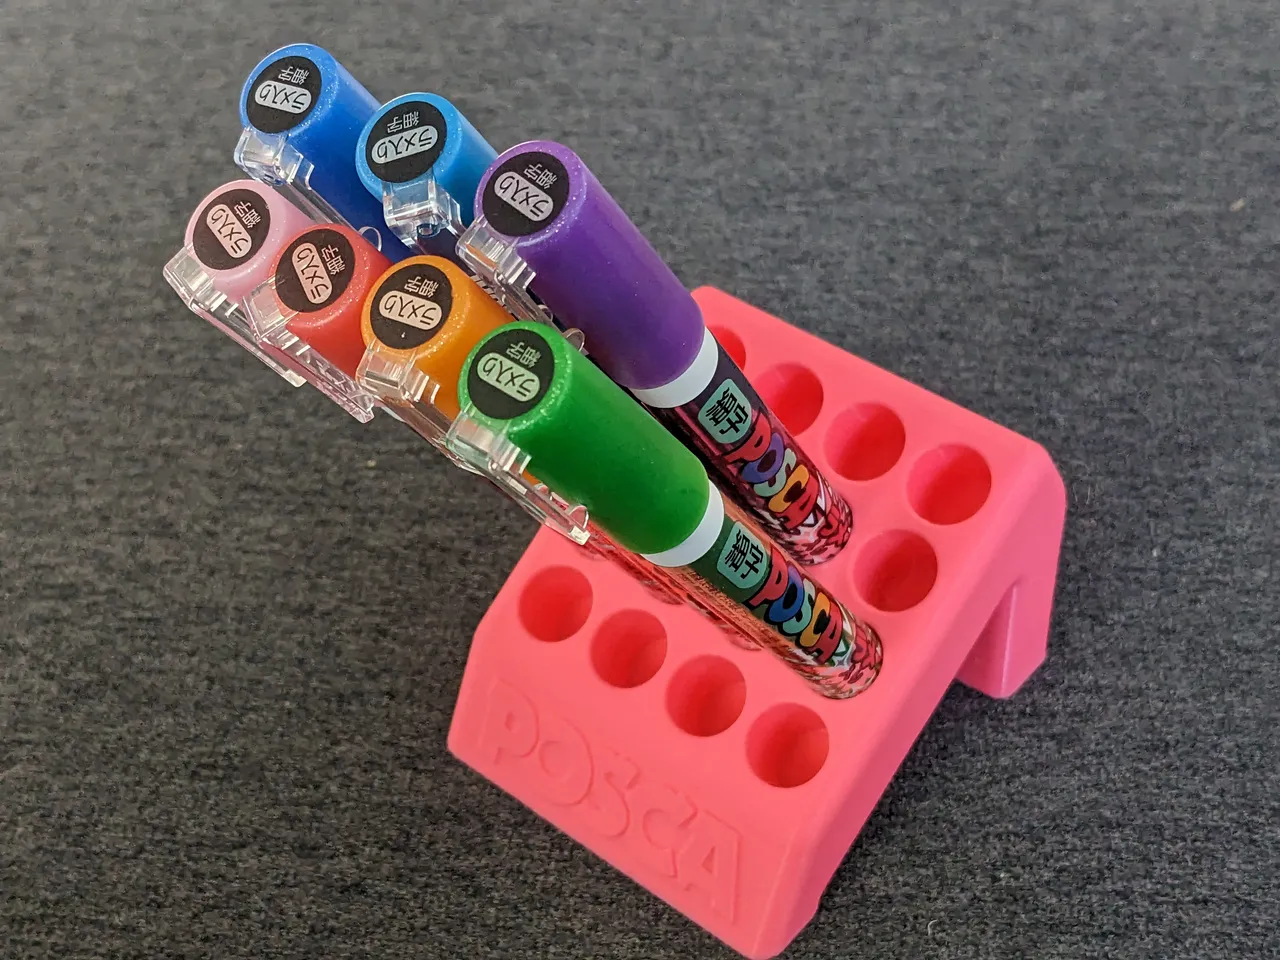 UNI POSCA 16-marker stand for 3M size by Zdre